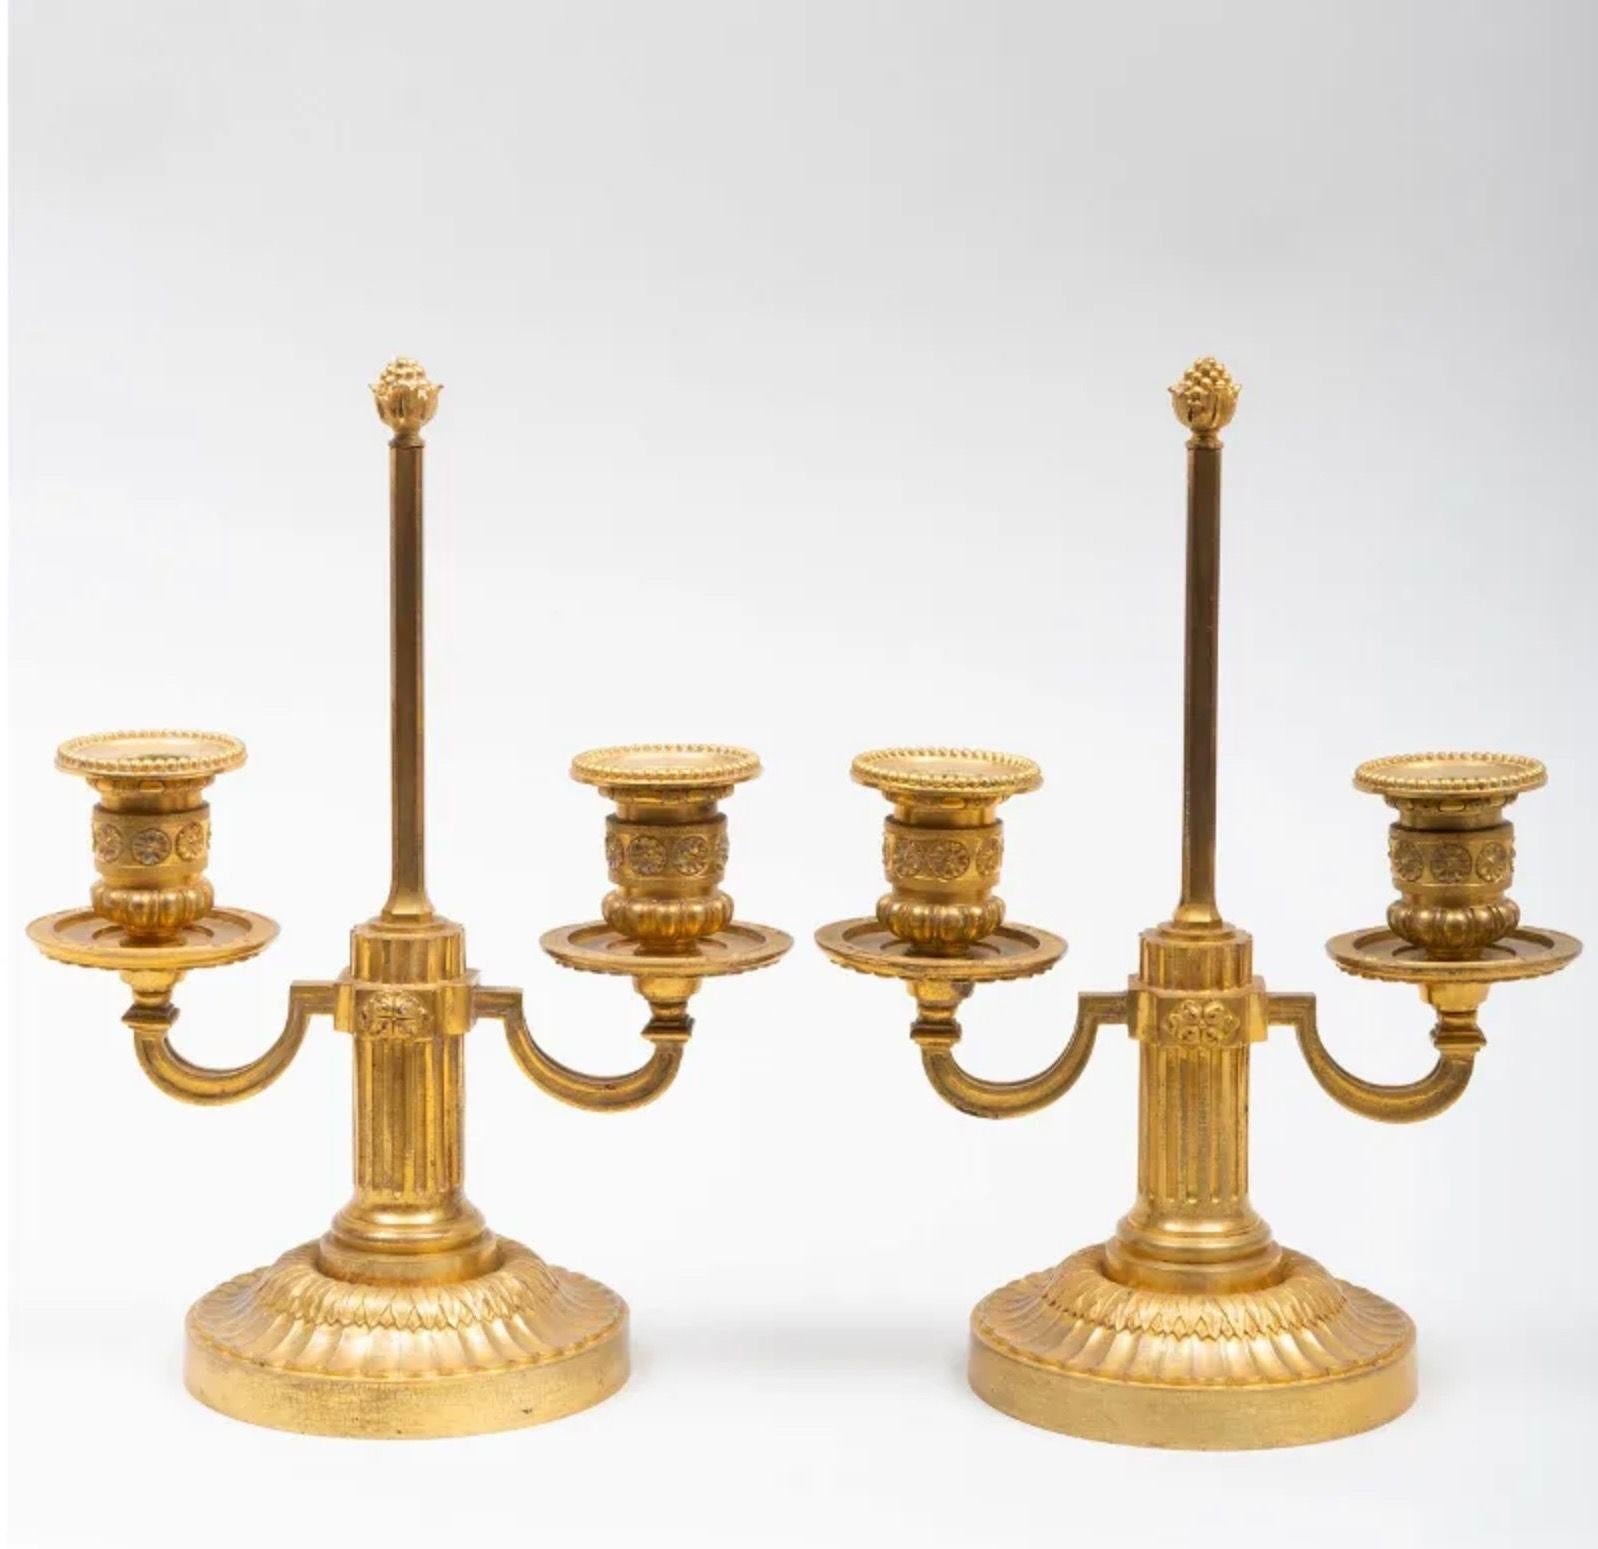 A Pair of Louis XVI Style Two-Light Ormolu Candlesticks In Good Condition For Sale In Spencertown, NY